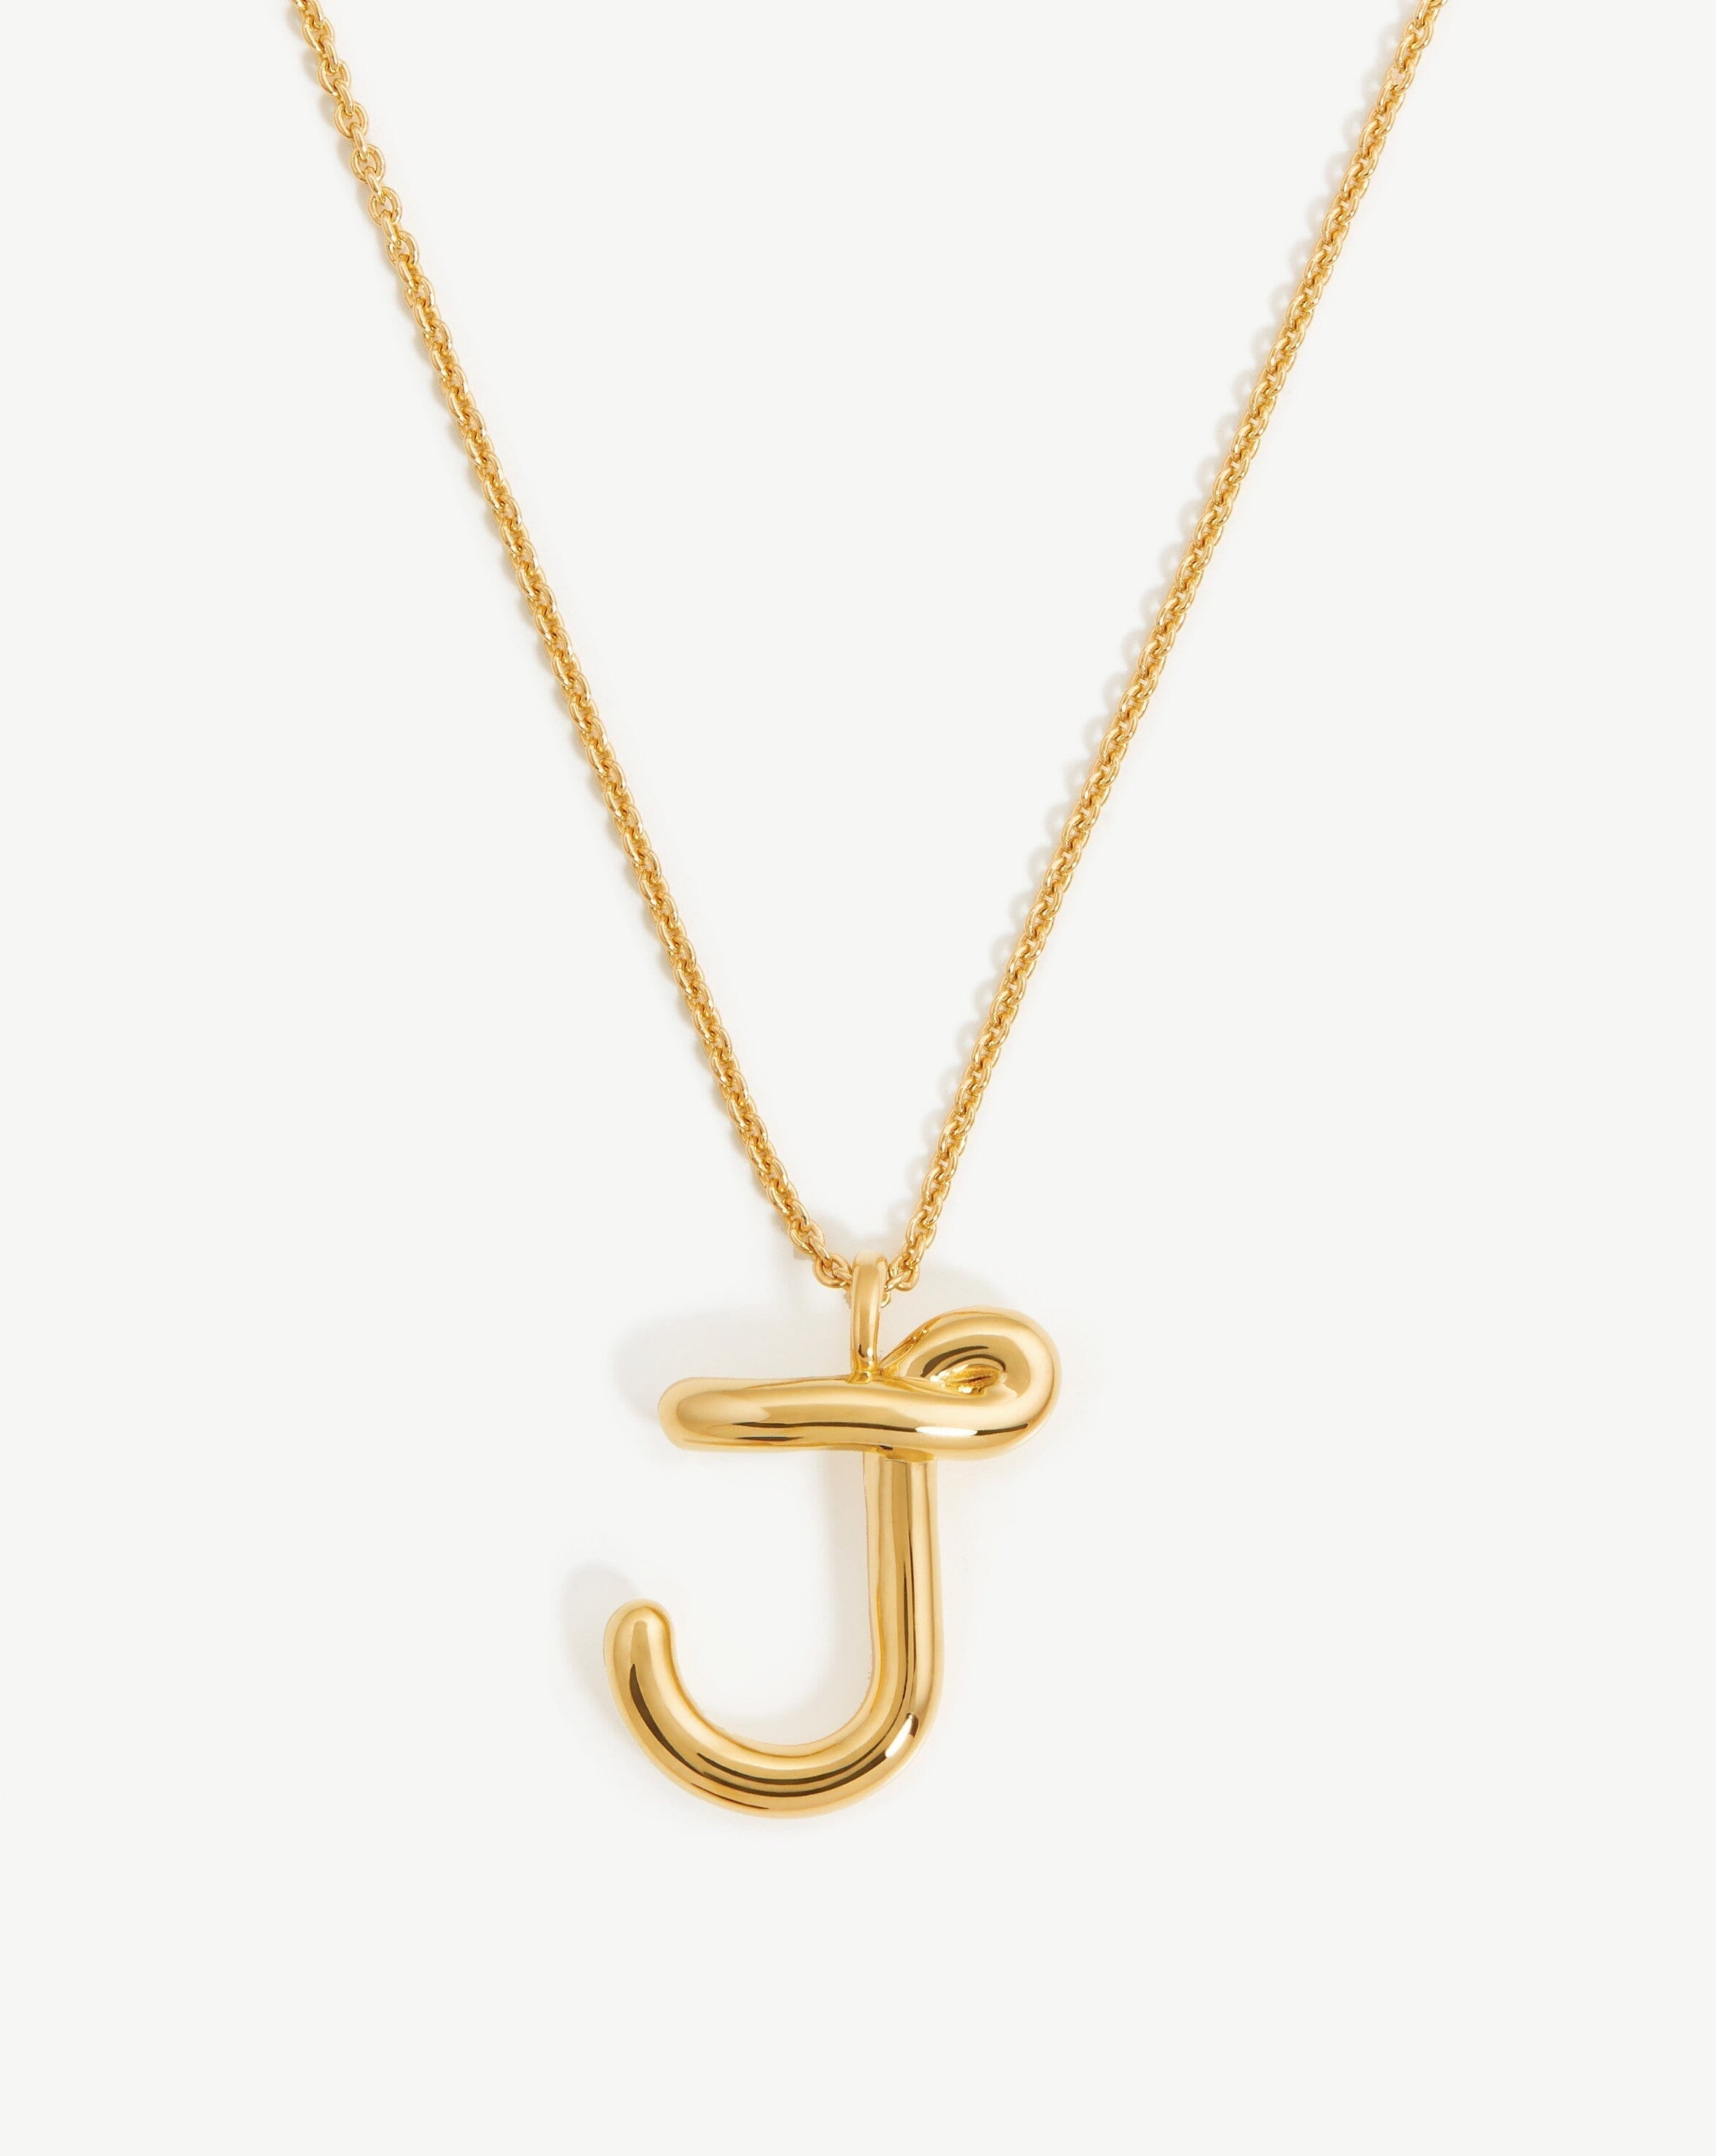 W Initial Pendant - Gold Filled